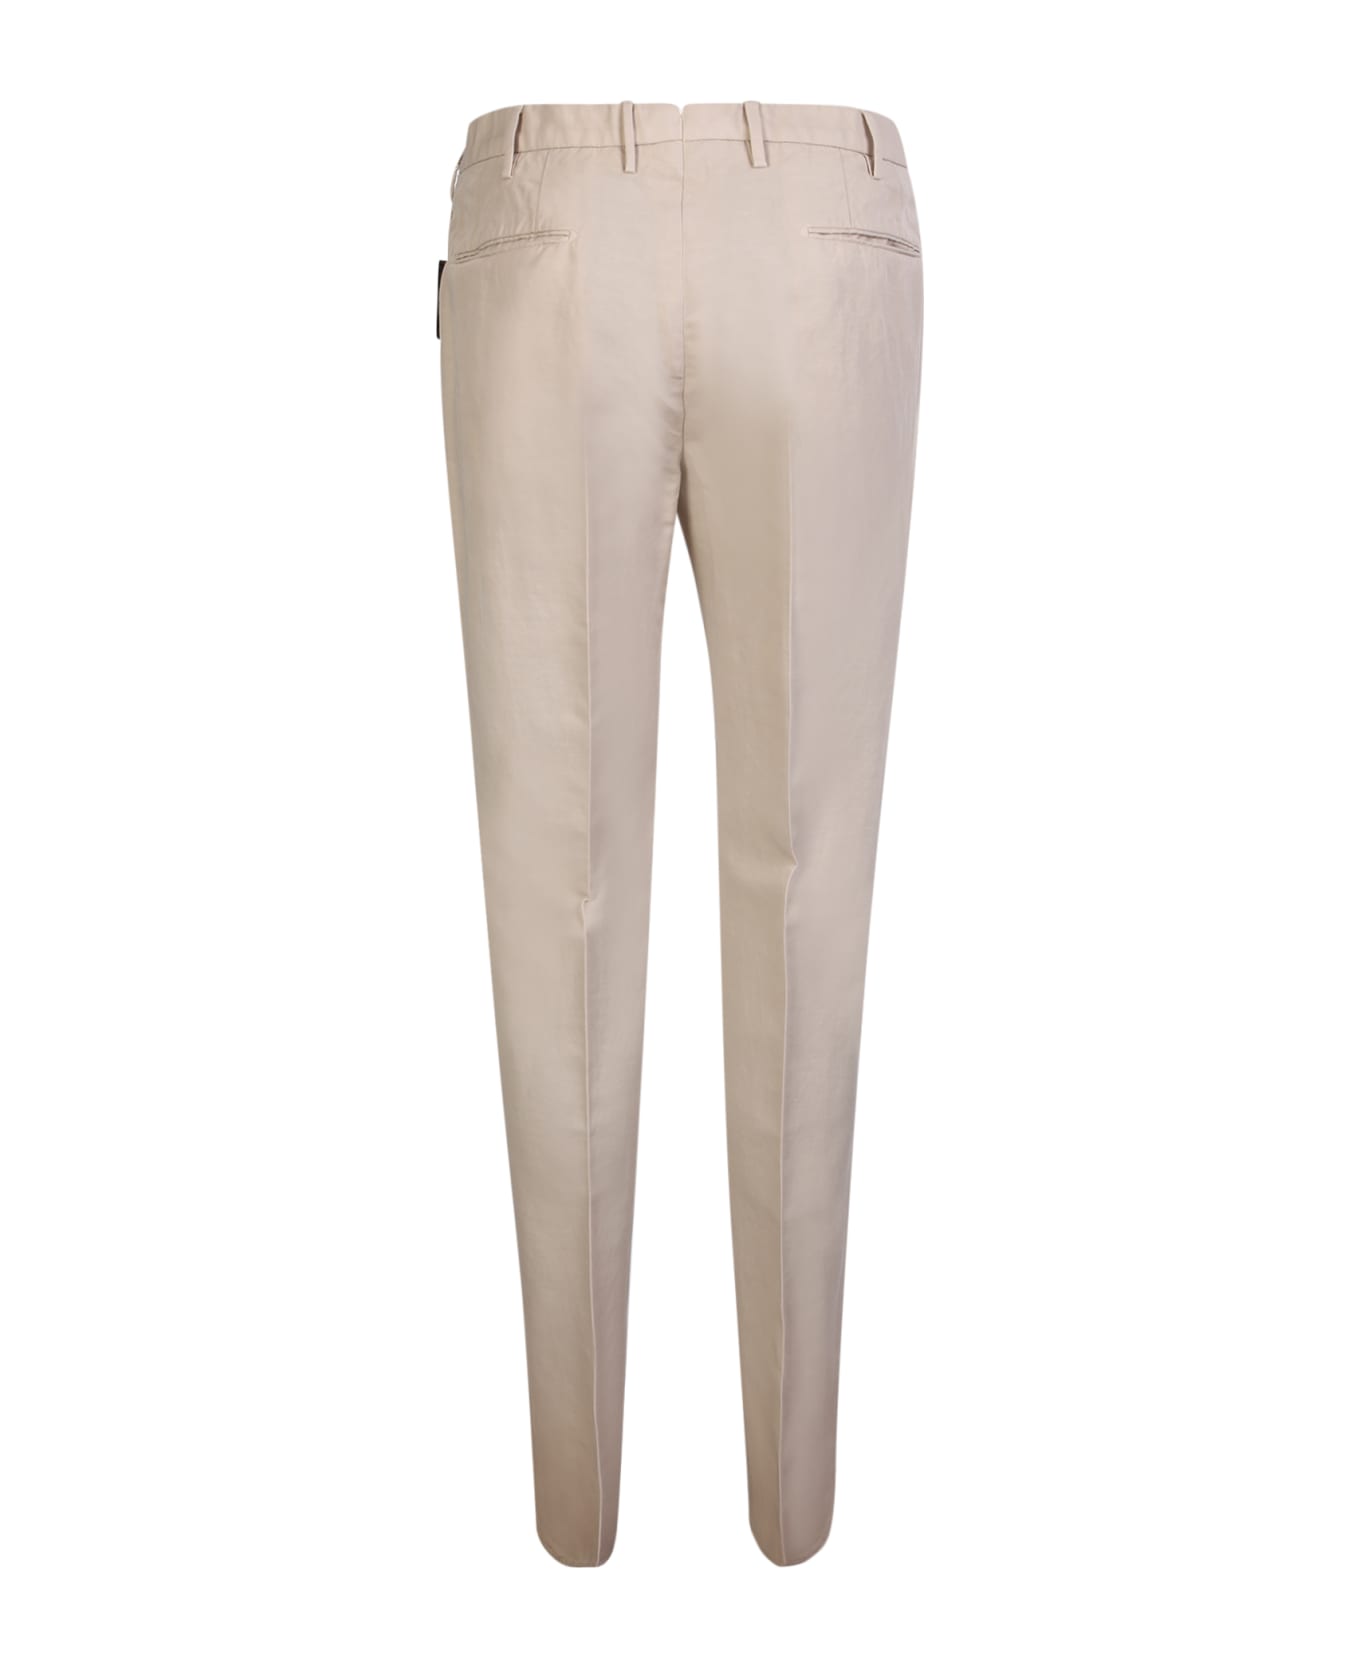 Incotex Grey Tailored Trousers - Grey